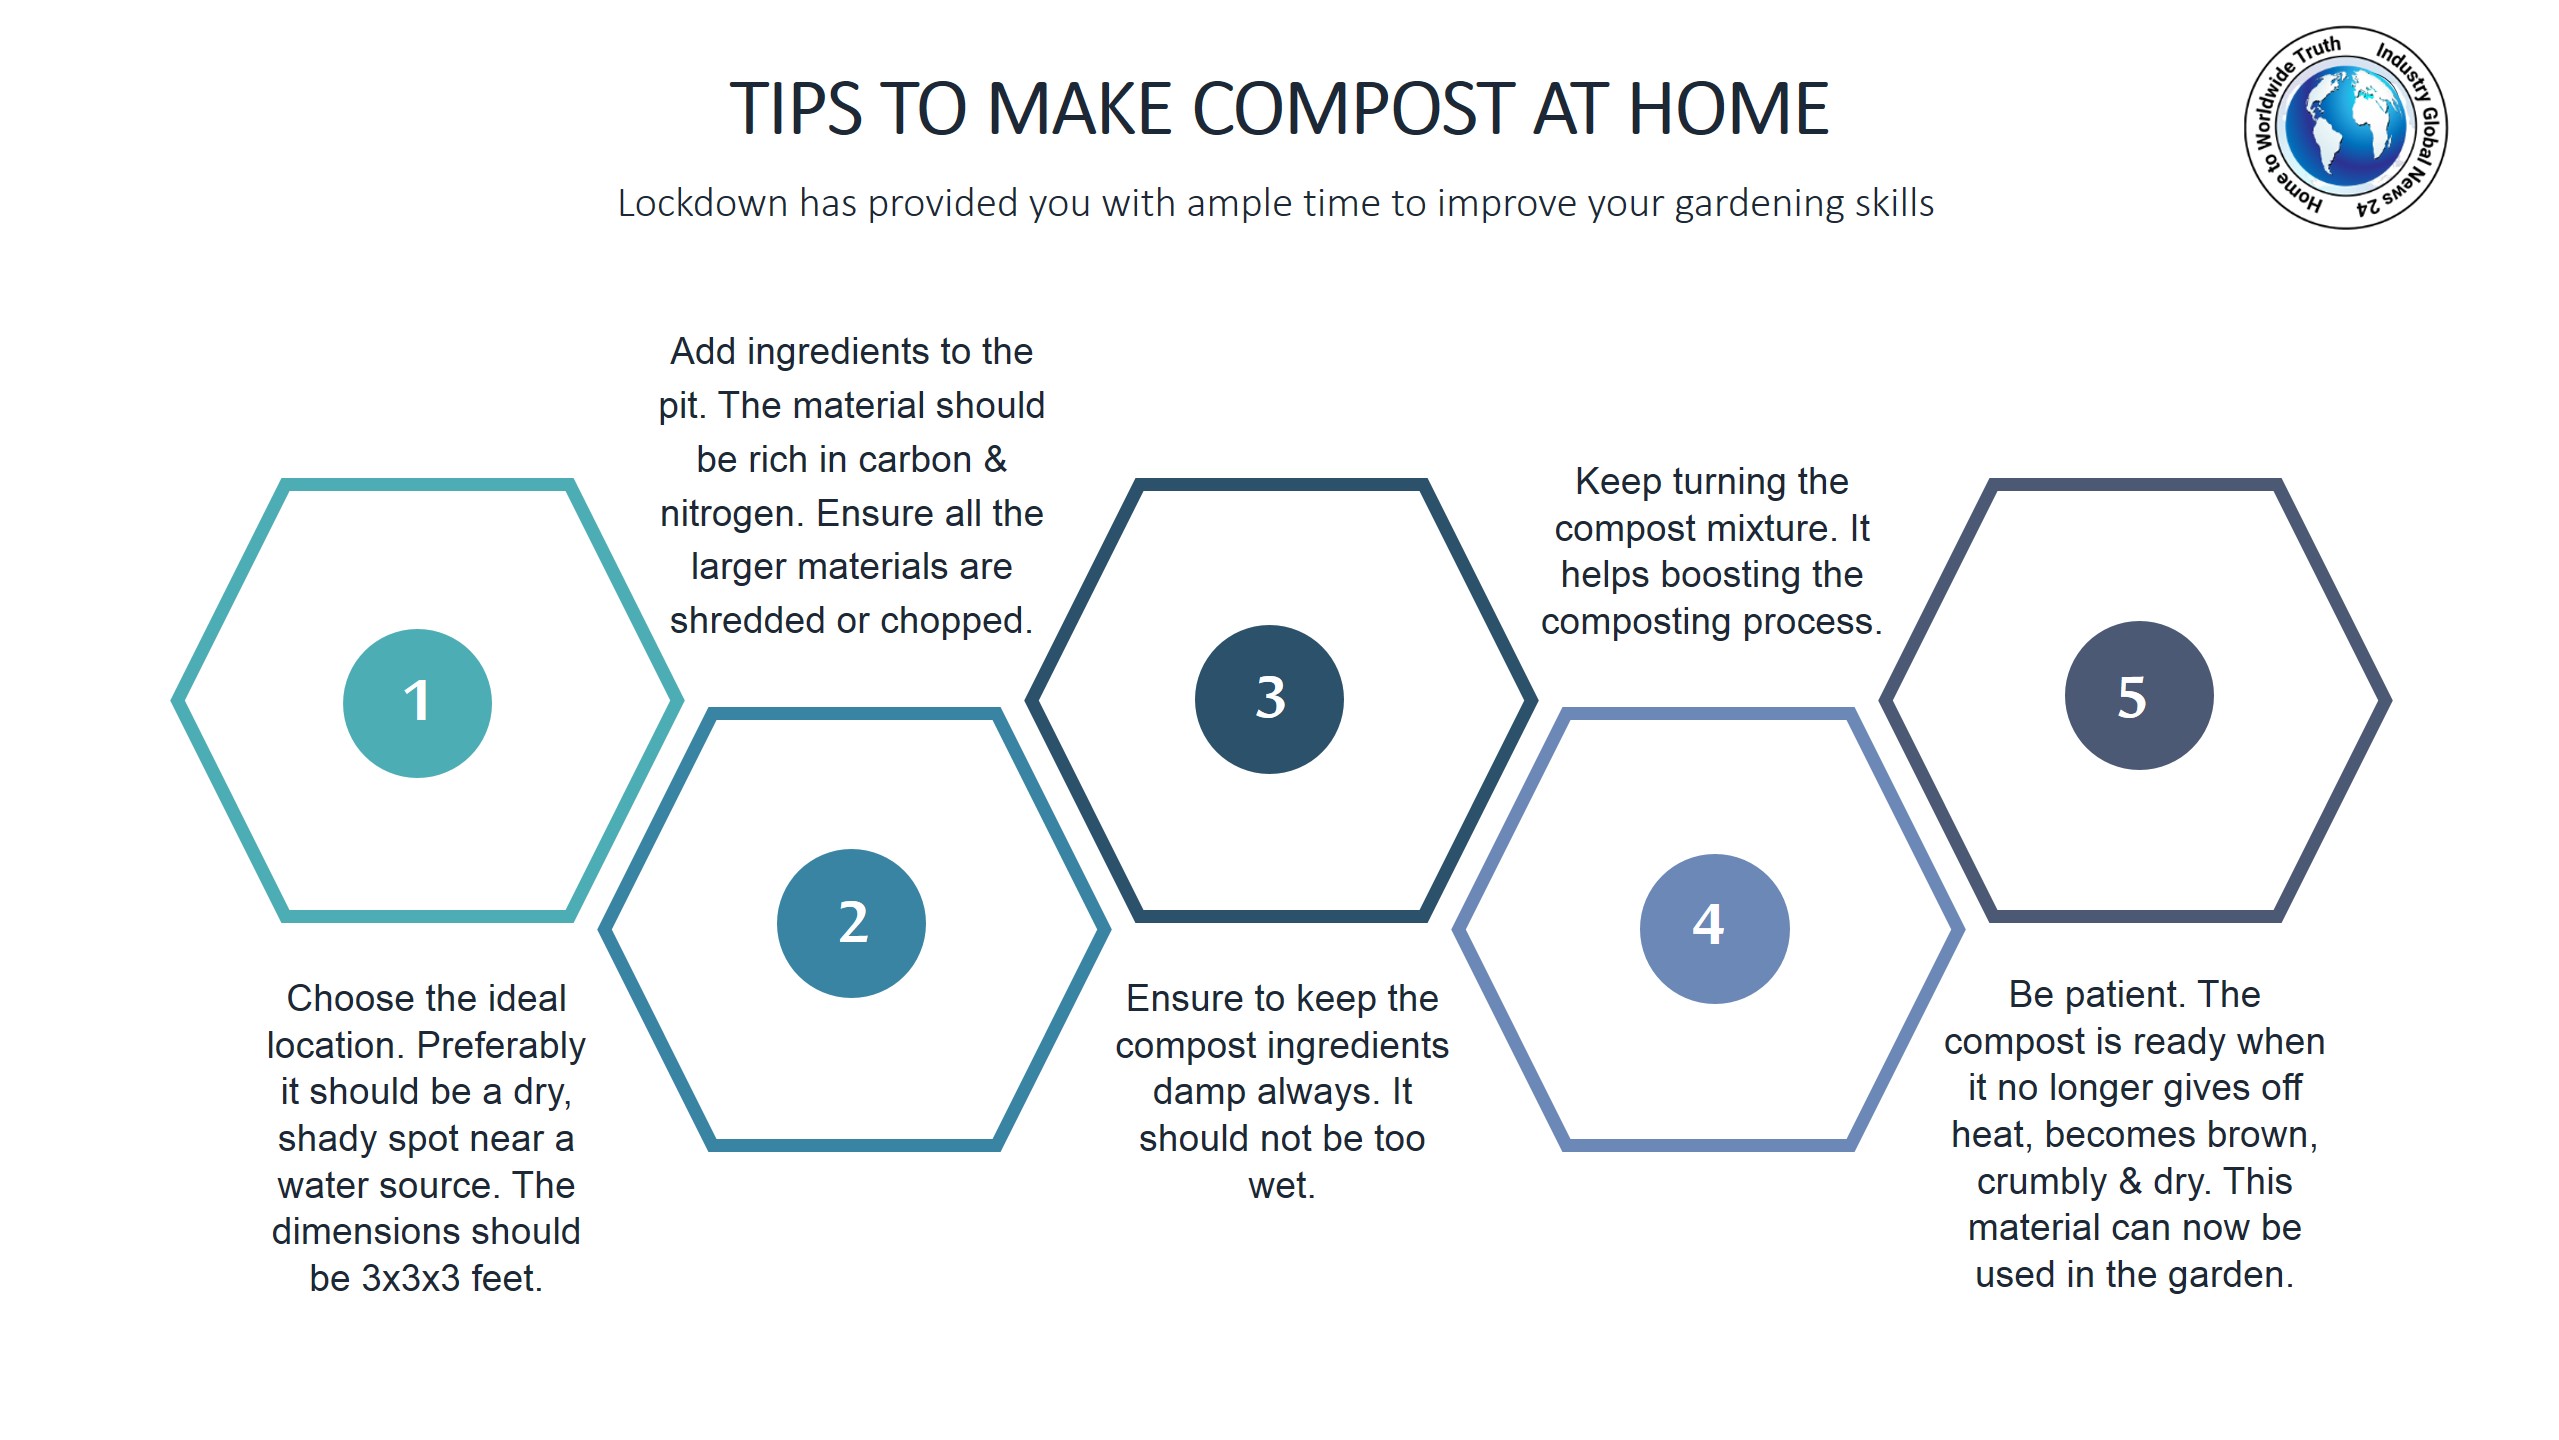 Tips to make compost at home